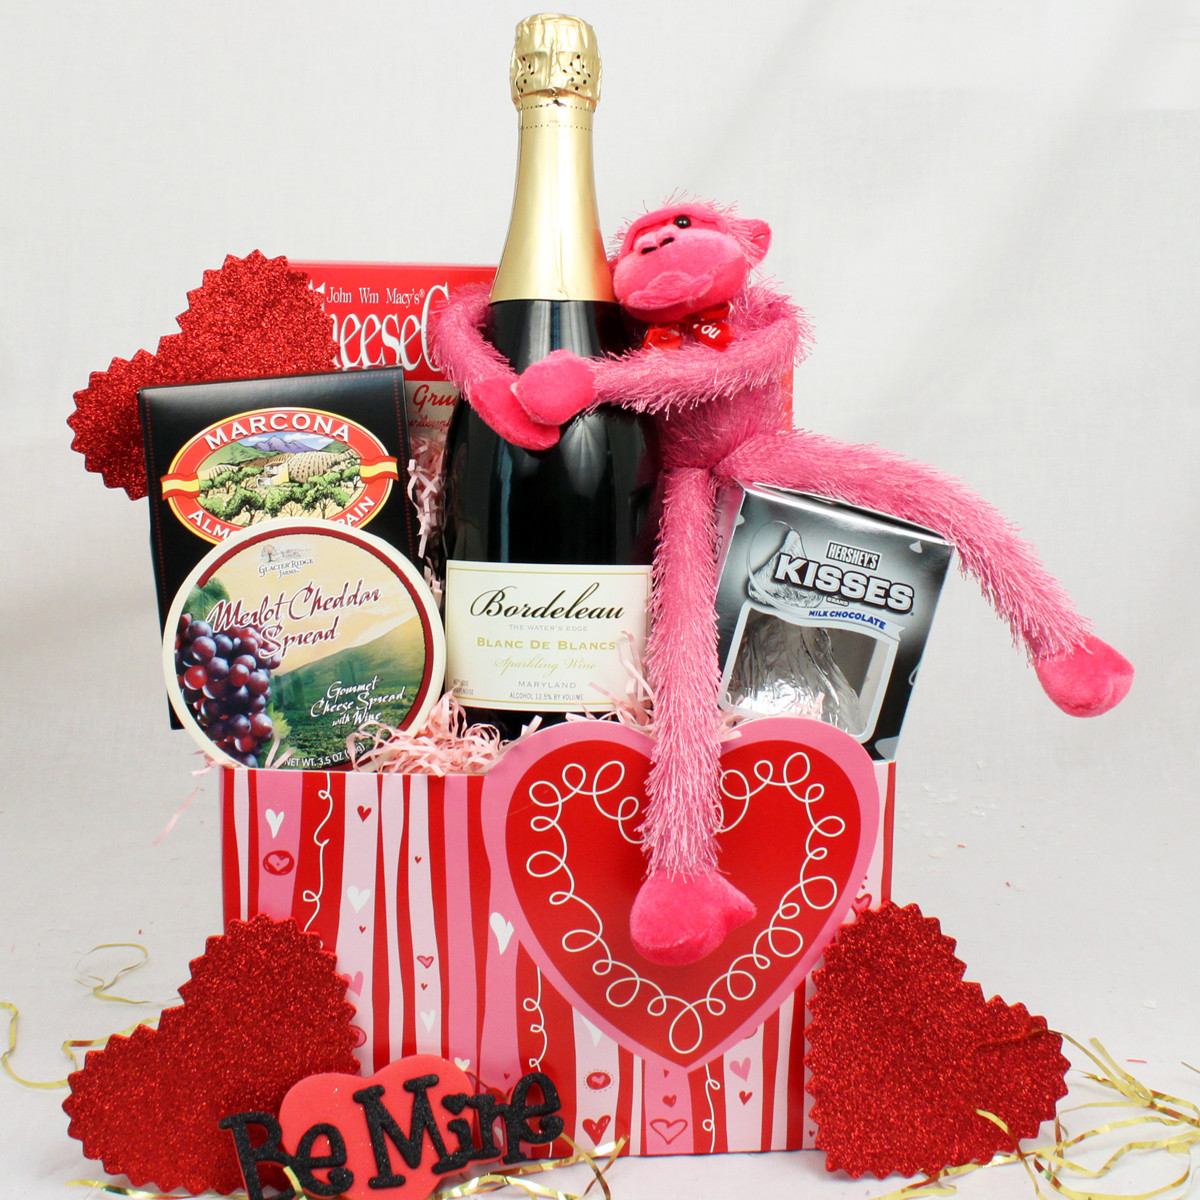 Cool Valentine Gift Ideas
 Creative and Thoughtful Valentine’s Day Gifts for Her